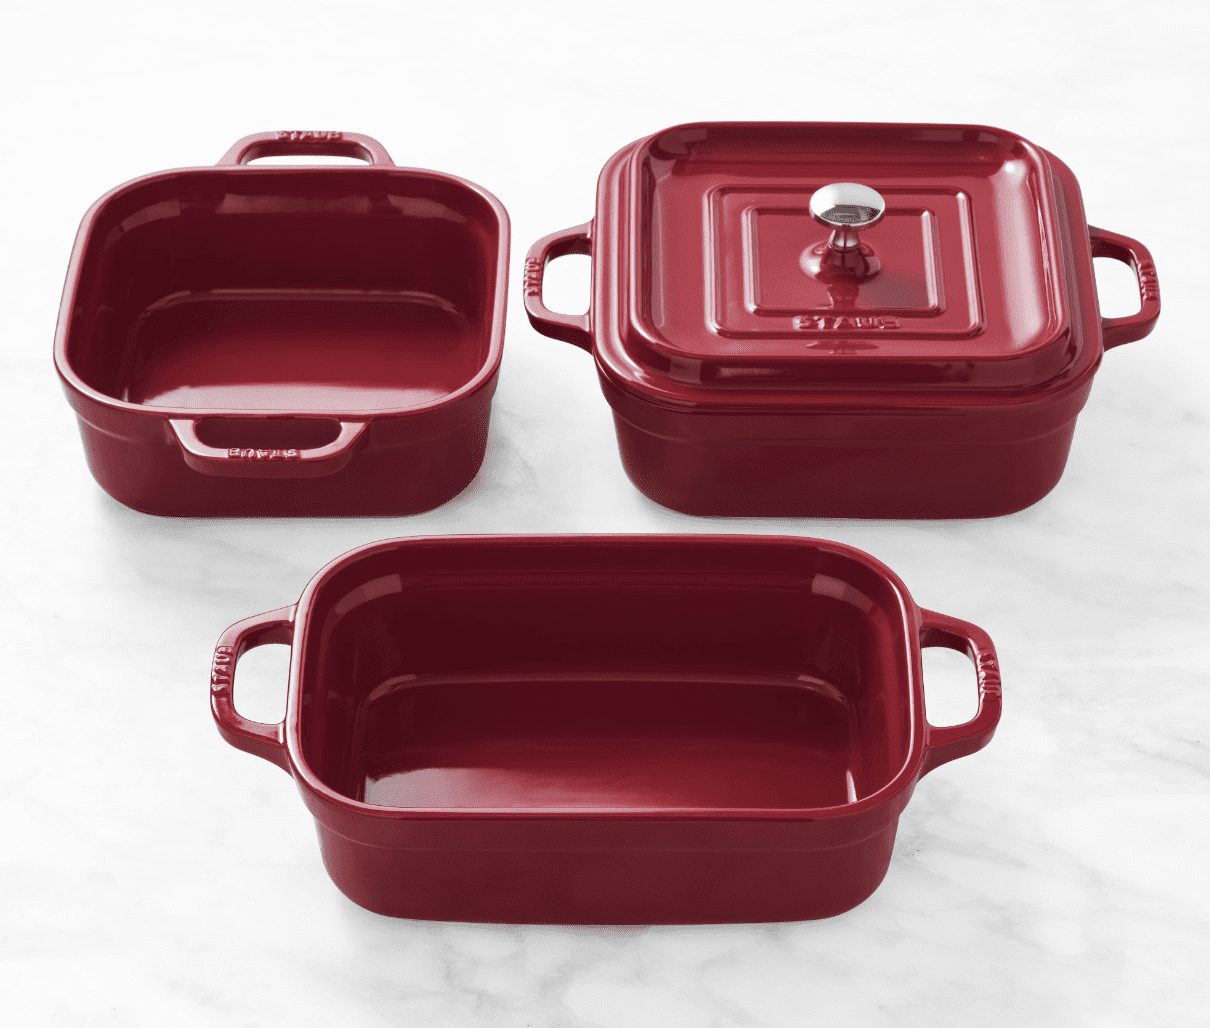 http://cdn.apartmenttherapy.info/image/upload/v1684770510/commerce/Williams-Sonoma-Staub-Stoneware-4-Piece-Set.png